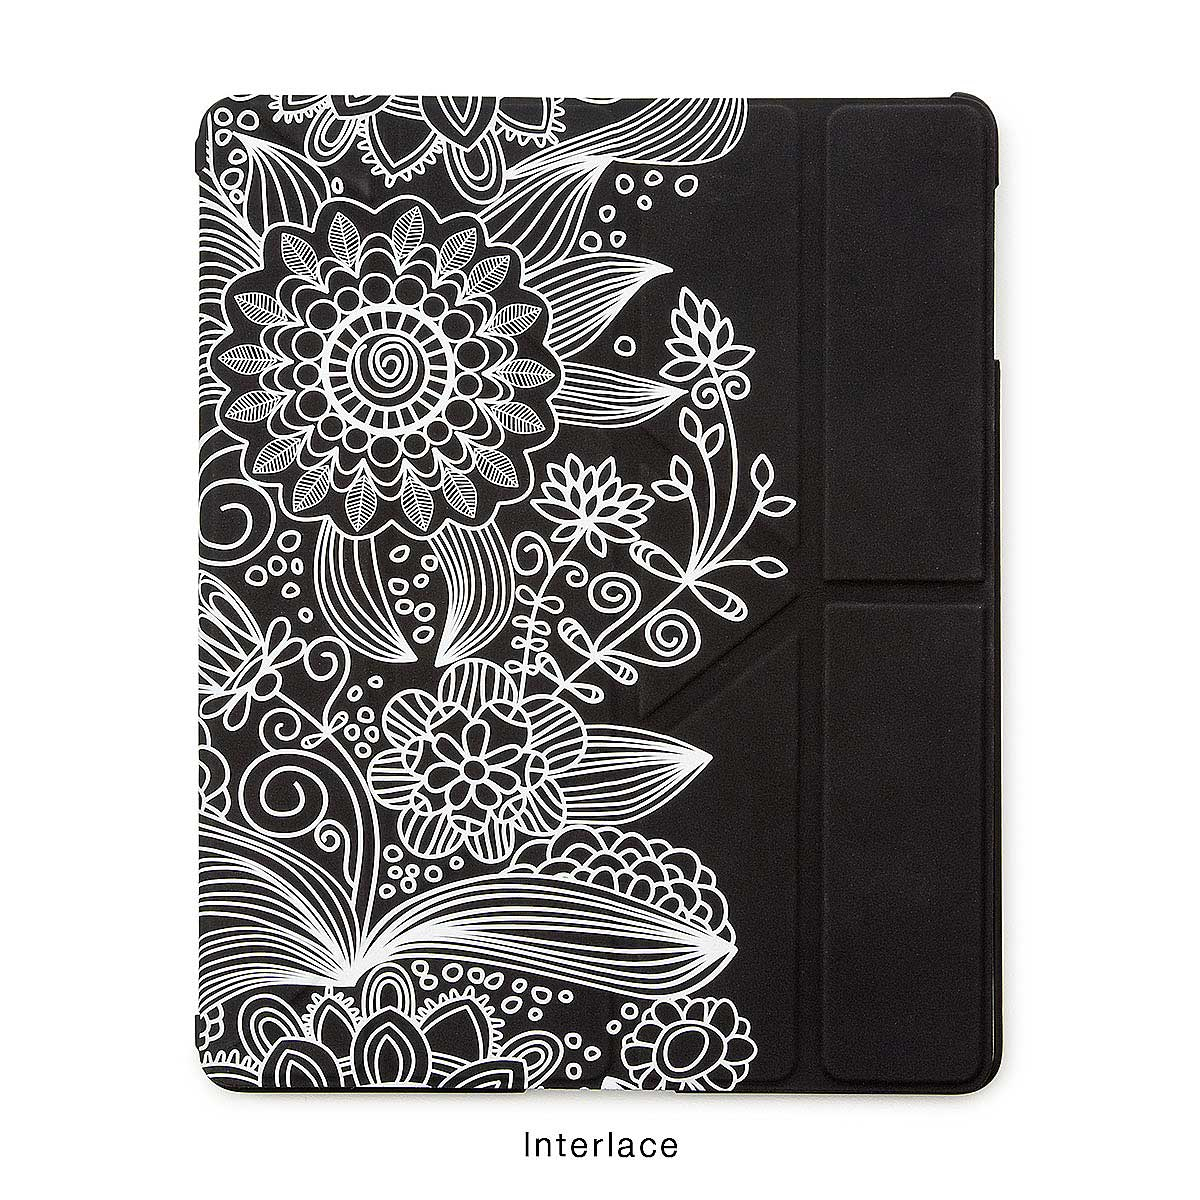 Origami Tablet Case Origami Ipad Cases Tablet Ipad Stand Cover Multi Apple Uncommongoods